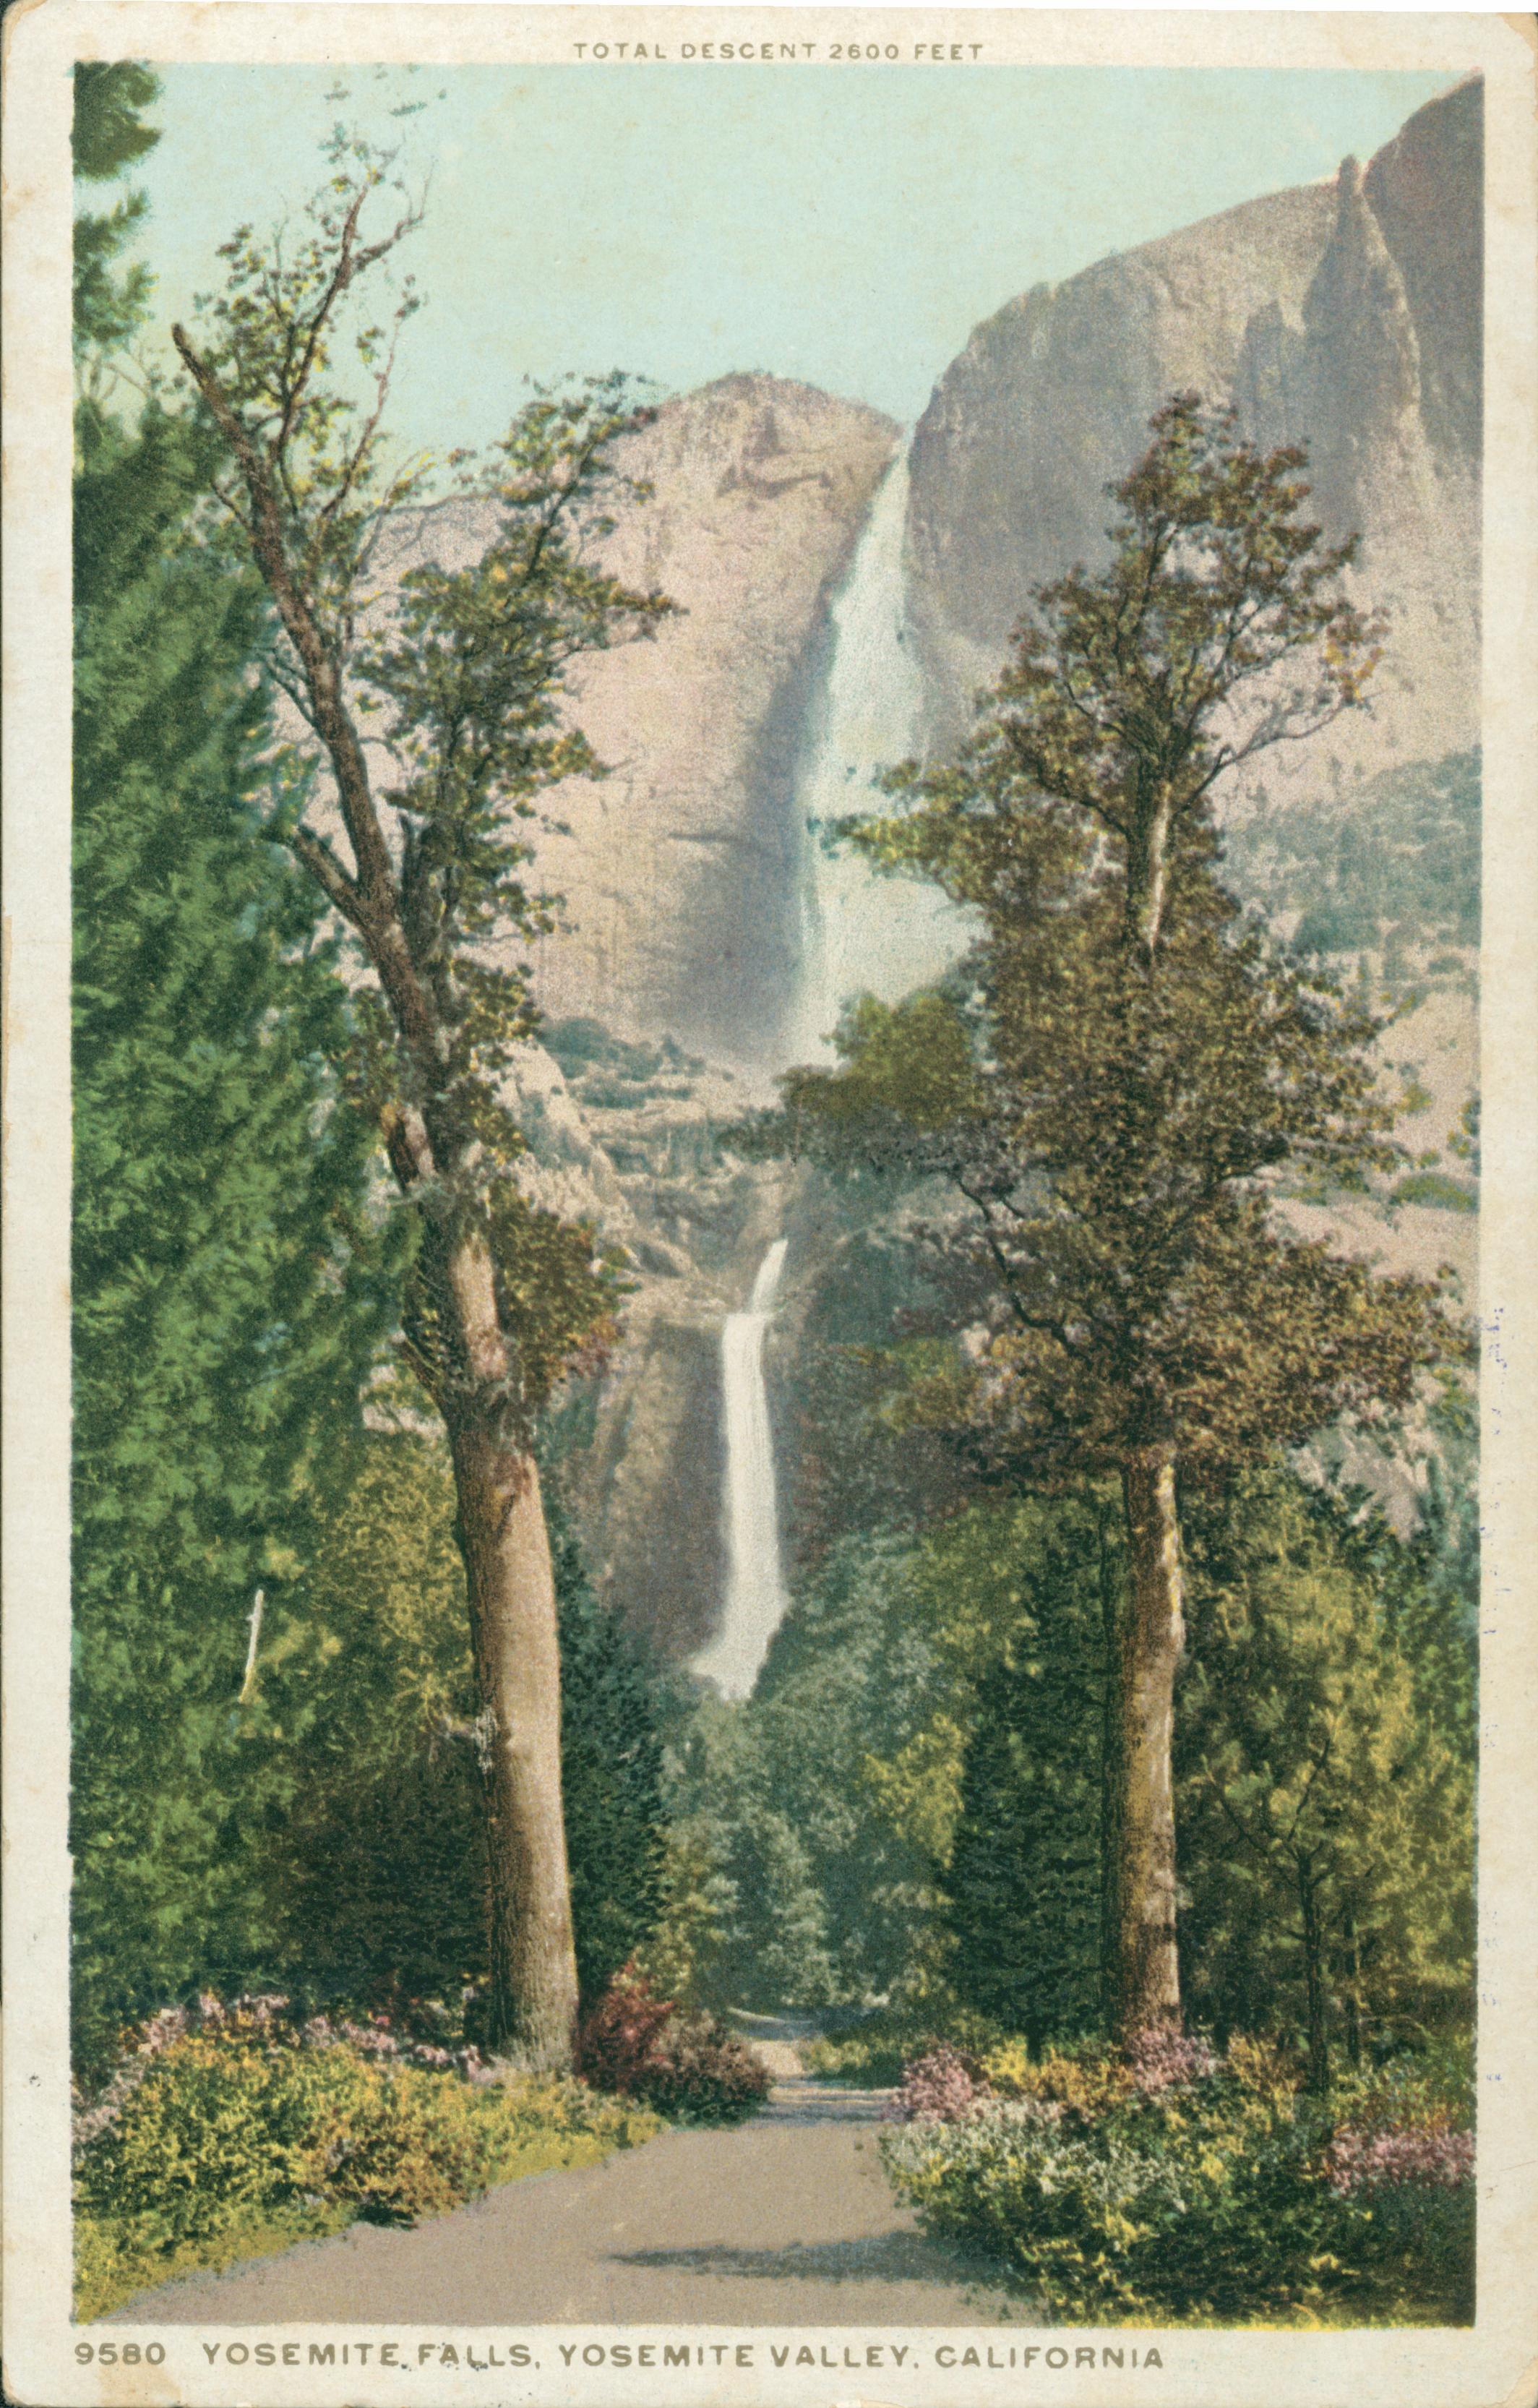 Shows a road lined by trees with Yosemite Falls in the background